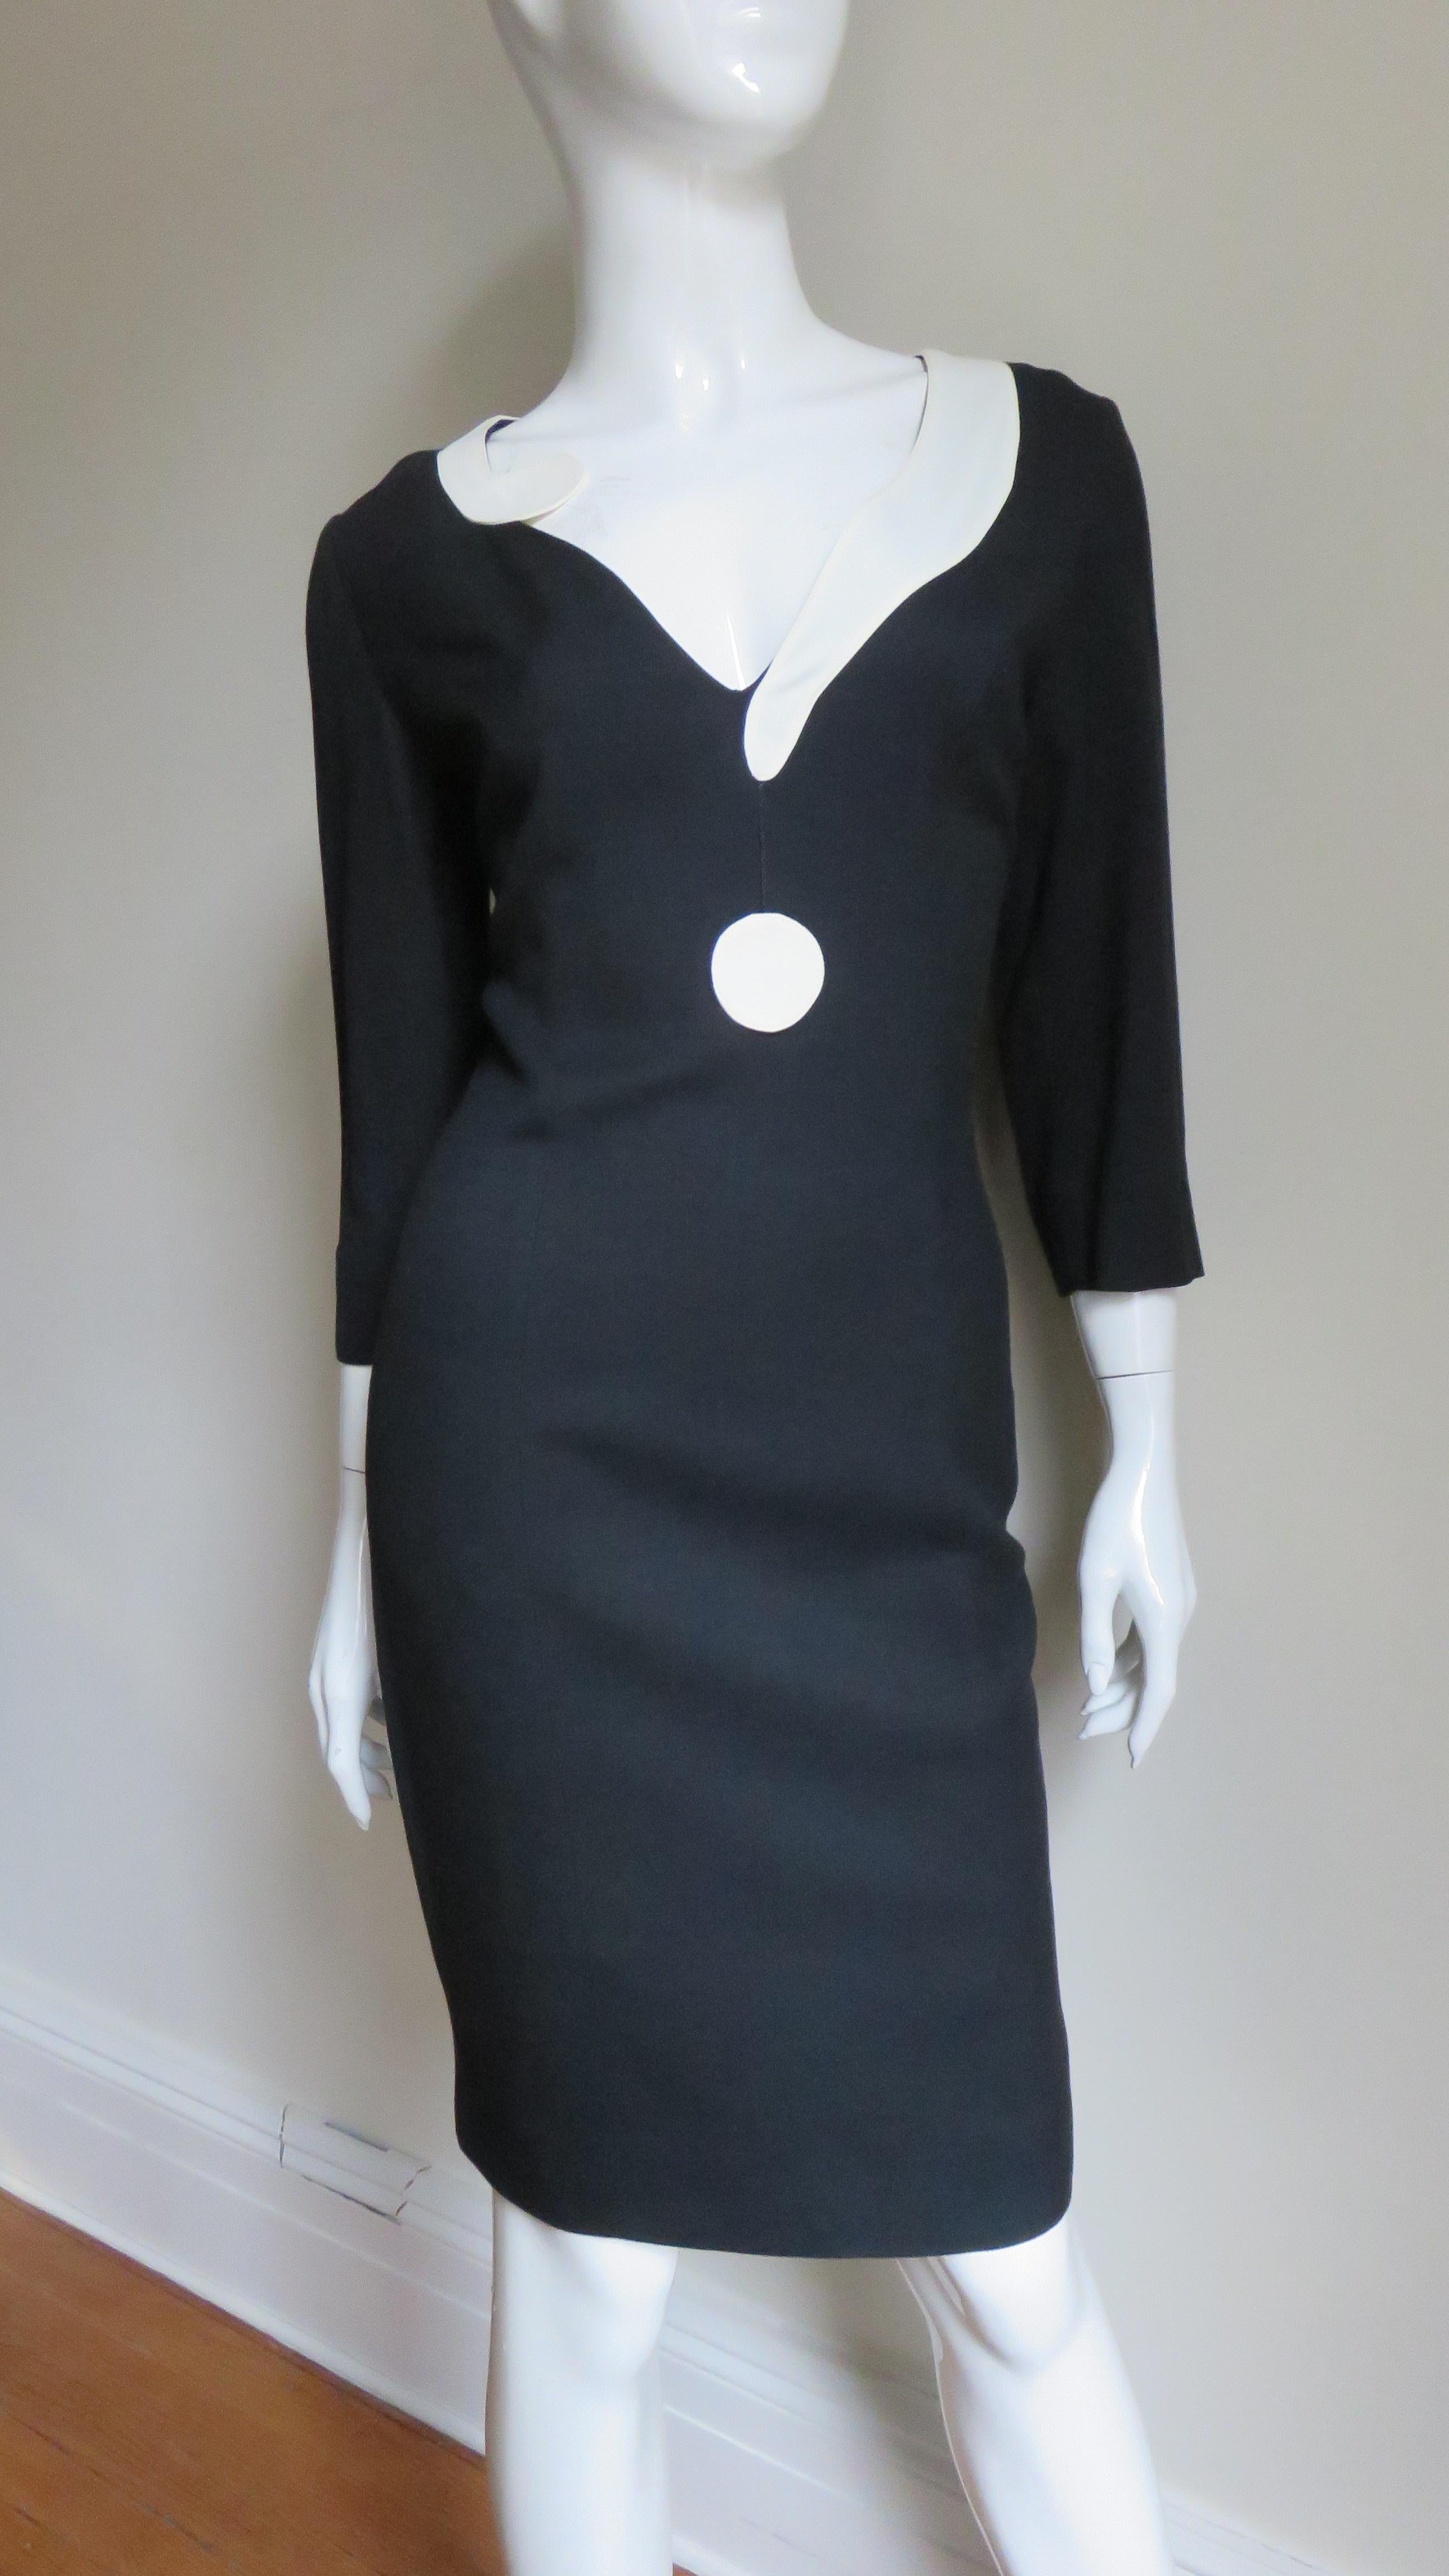 Moschino Couture Dress with Question Mark Collar A/W 1998 For Sale 3